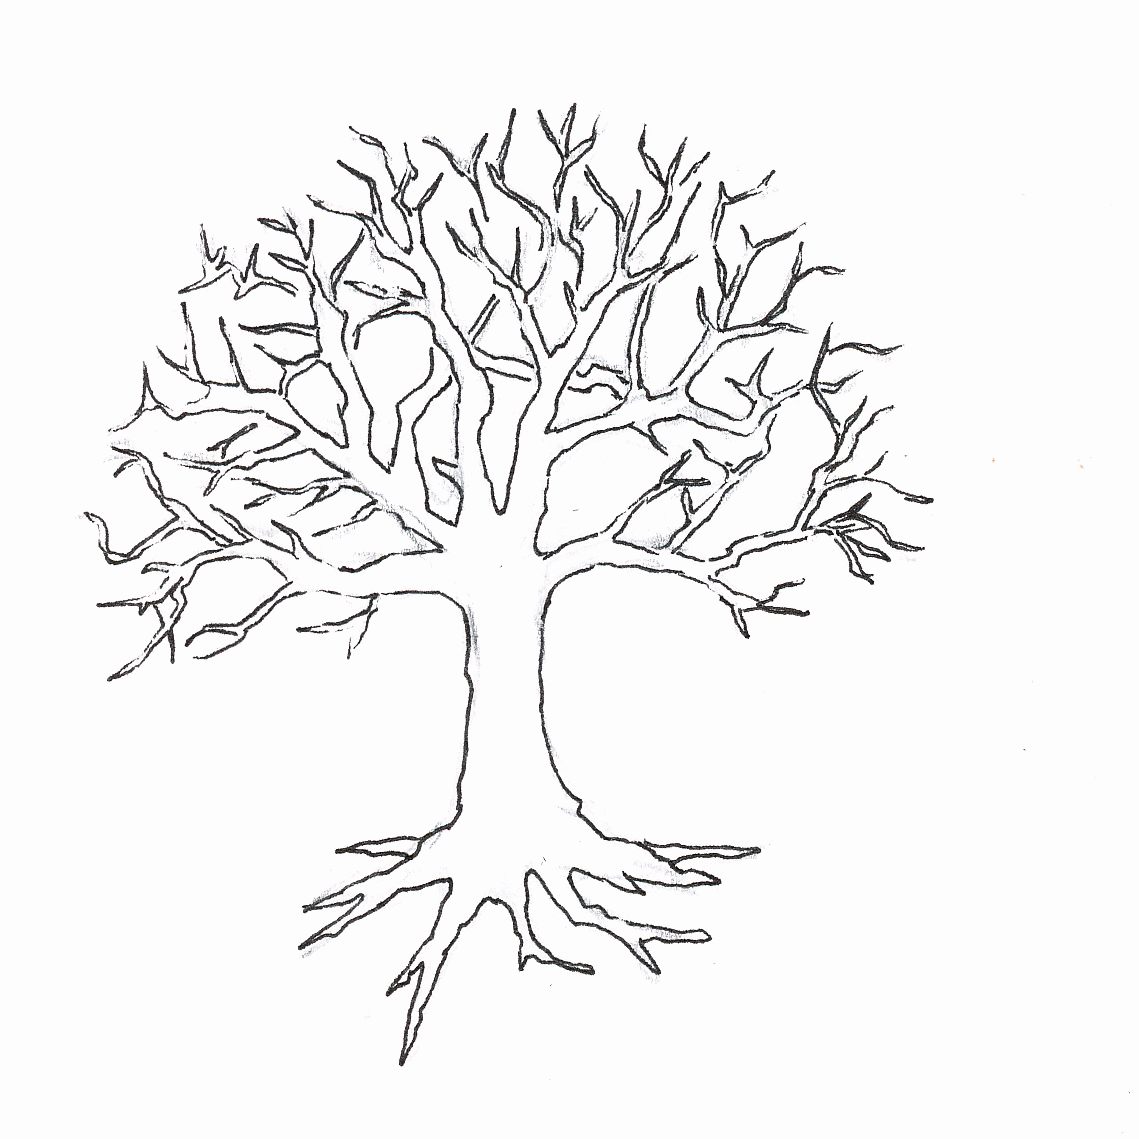 Tree With Branches Coloring Page - Coloring Pages for Kids and for ...